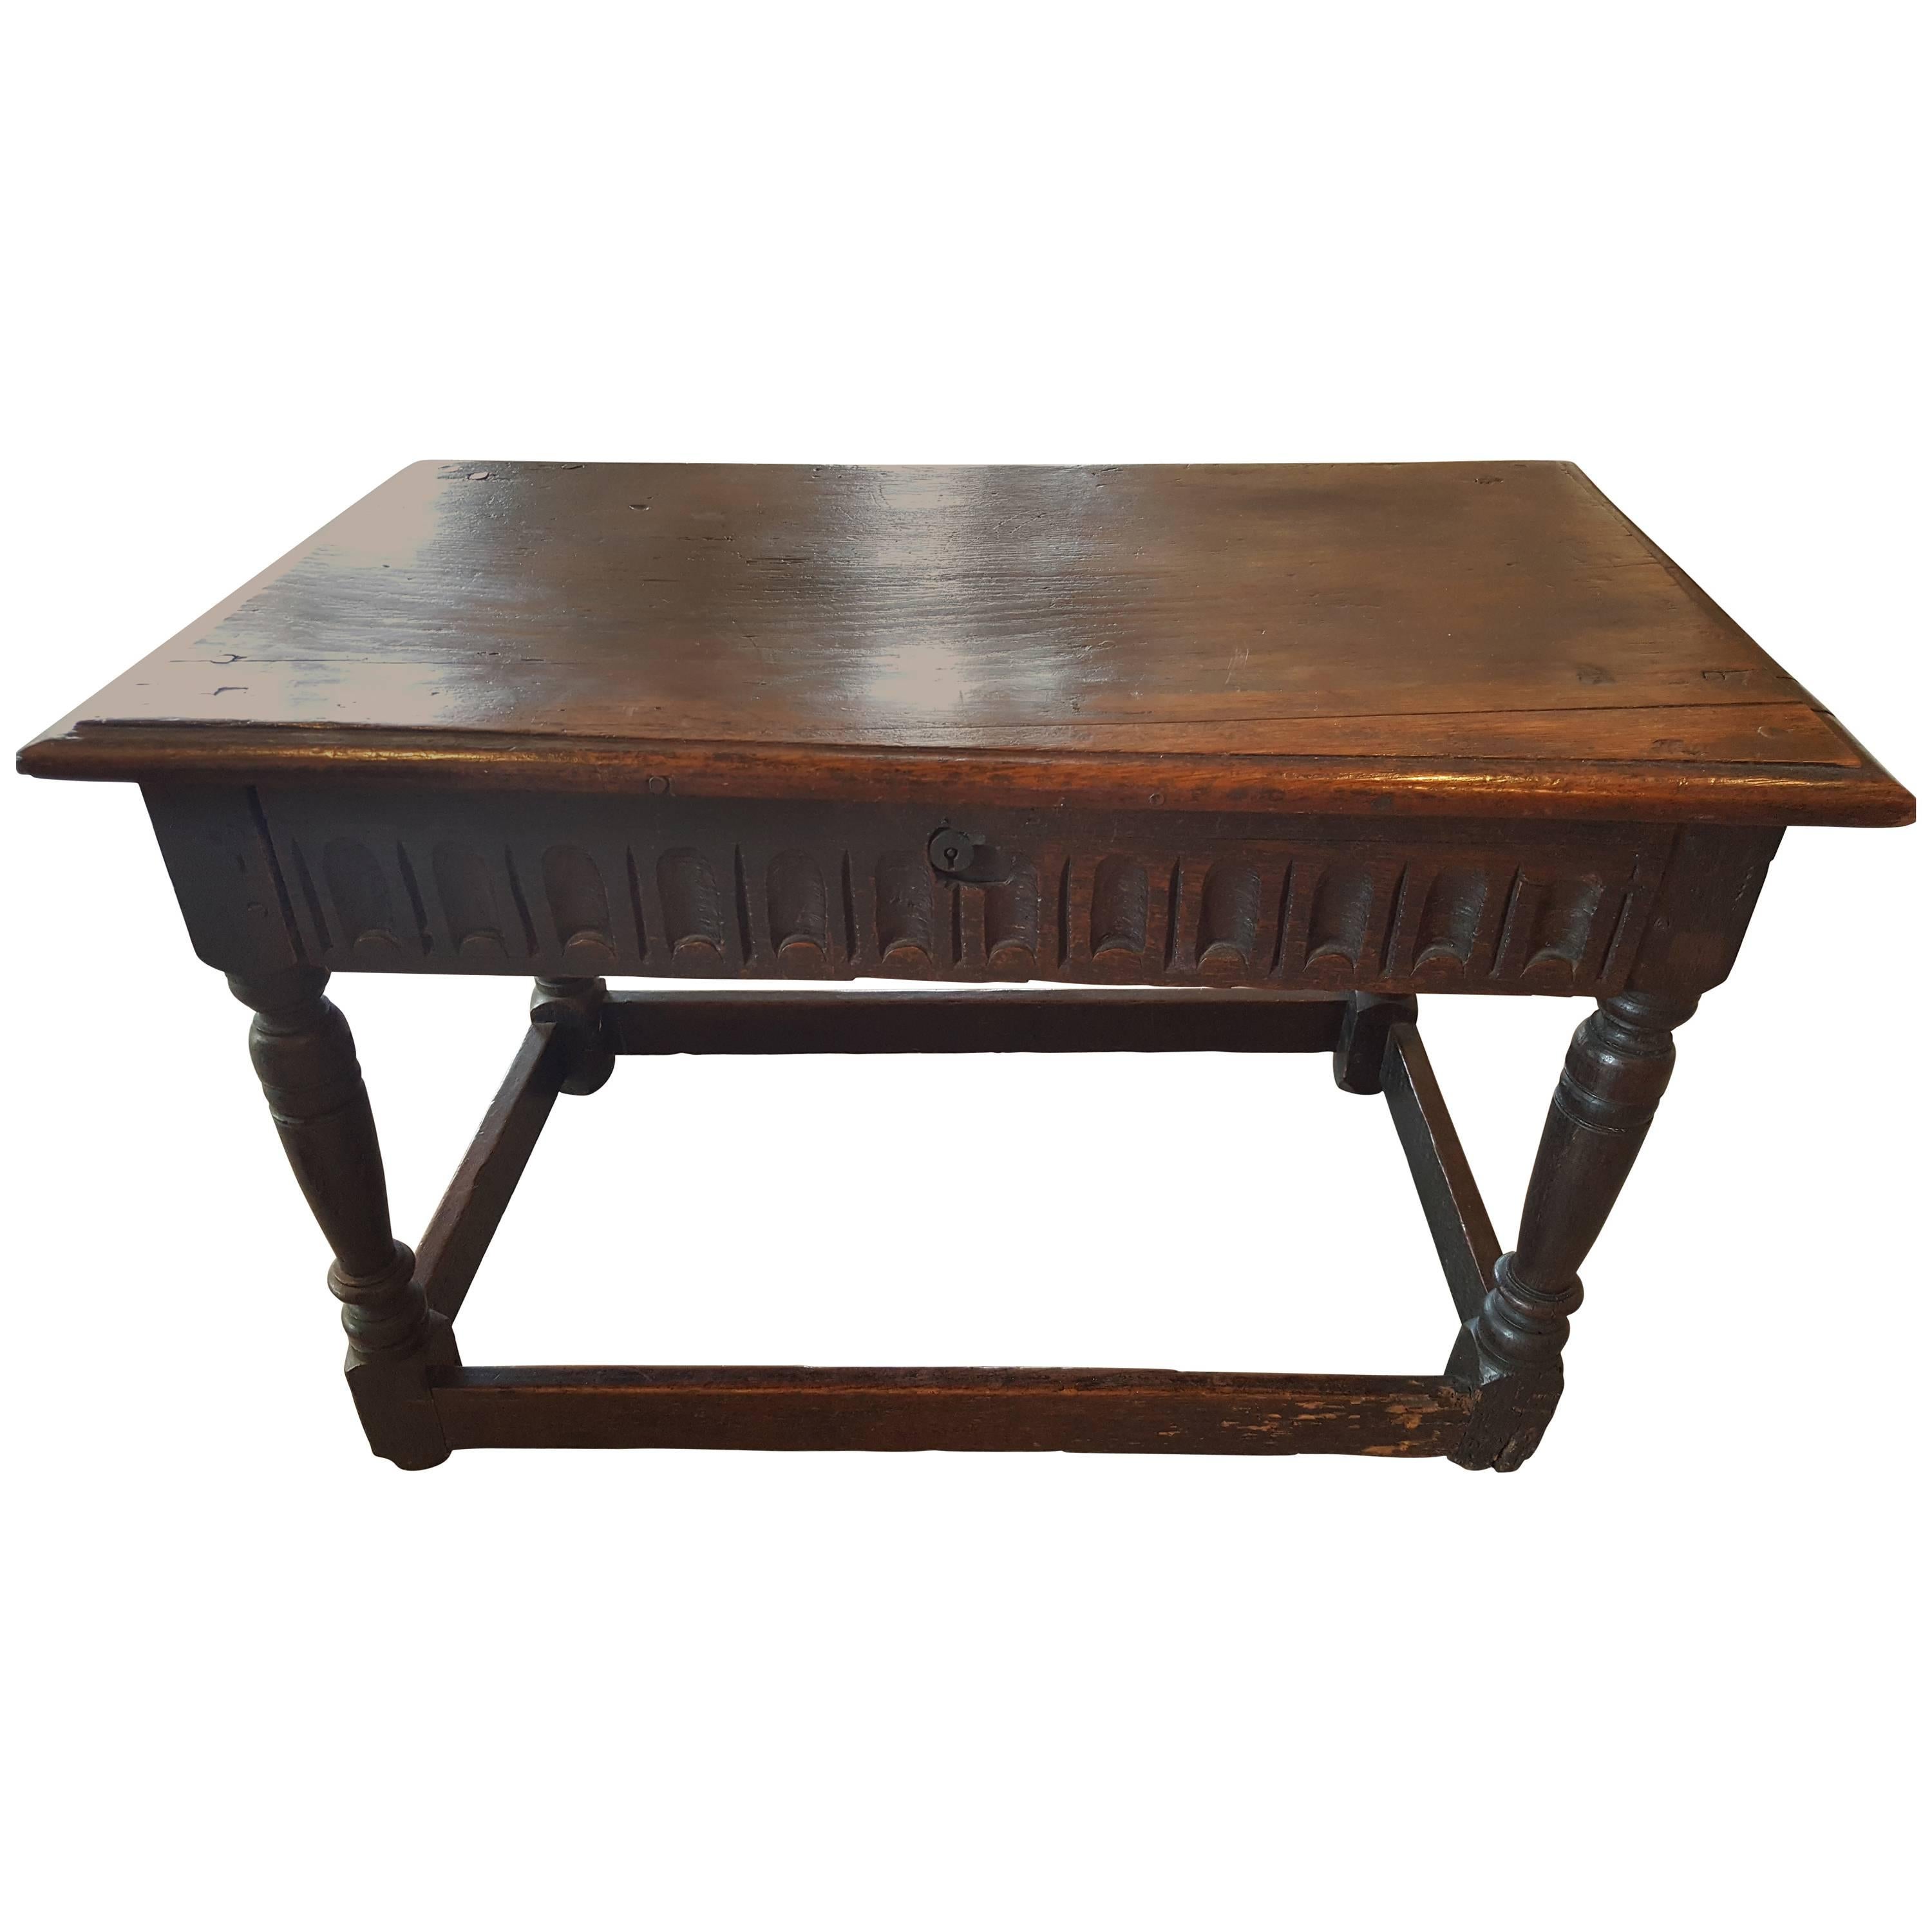 18th Century Small Table with Drawer